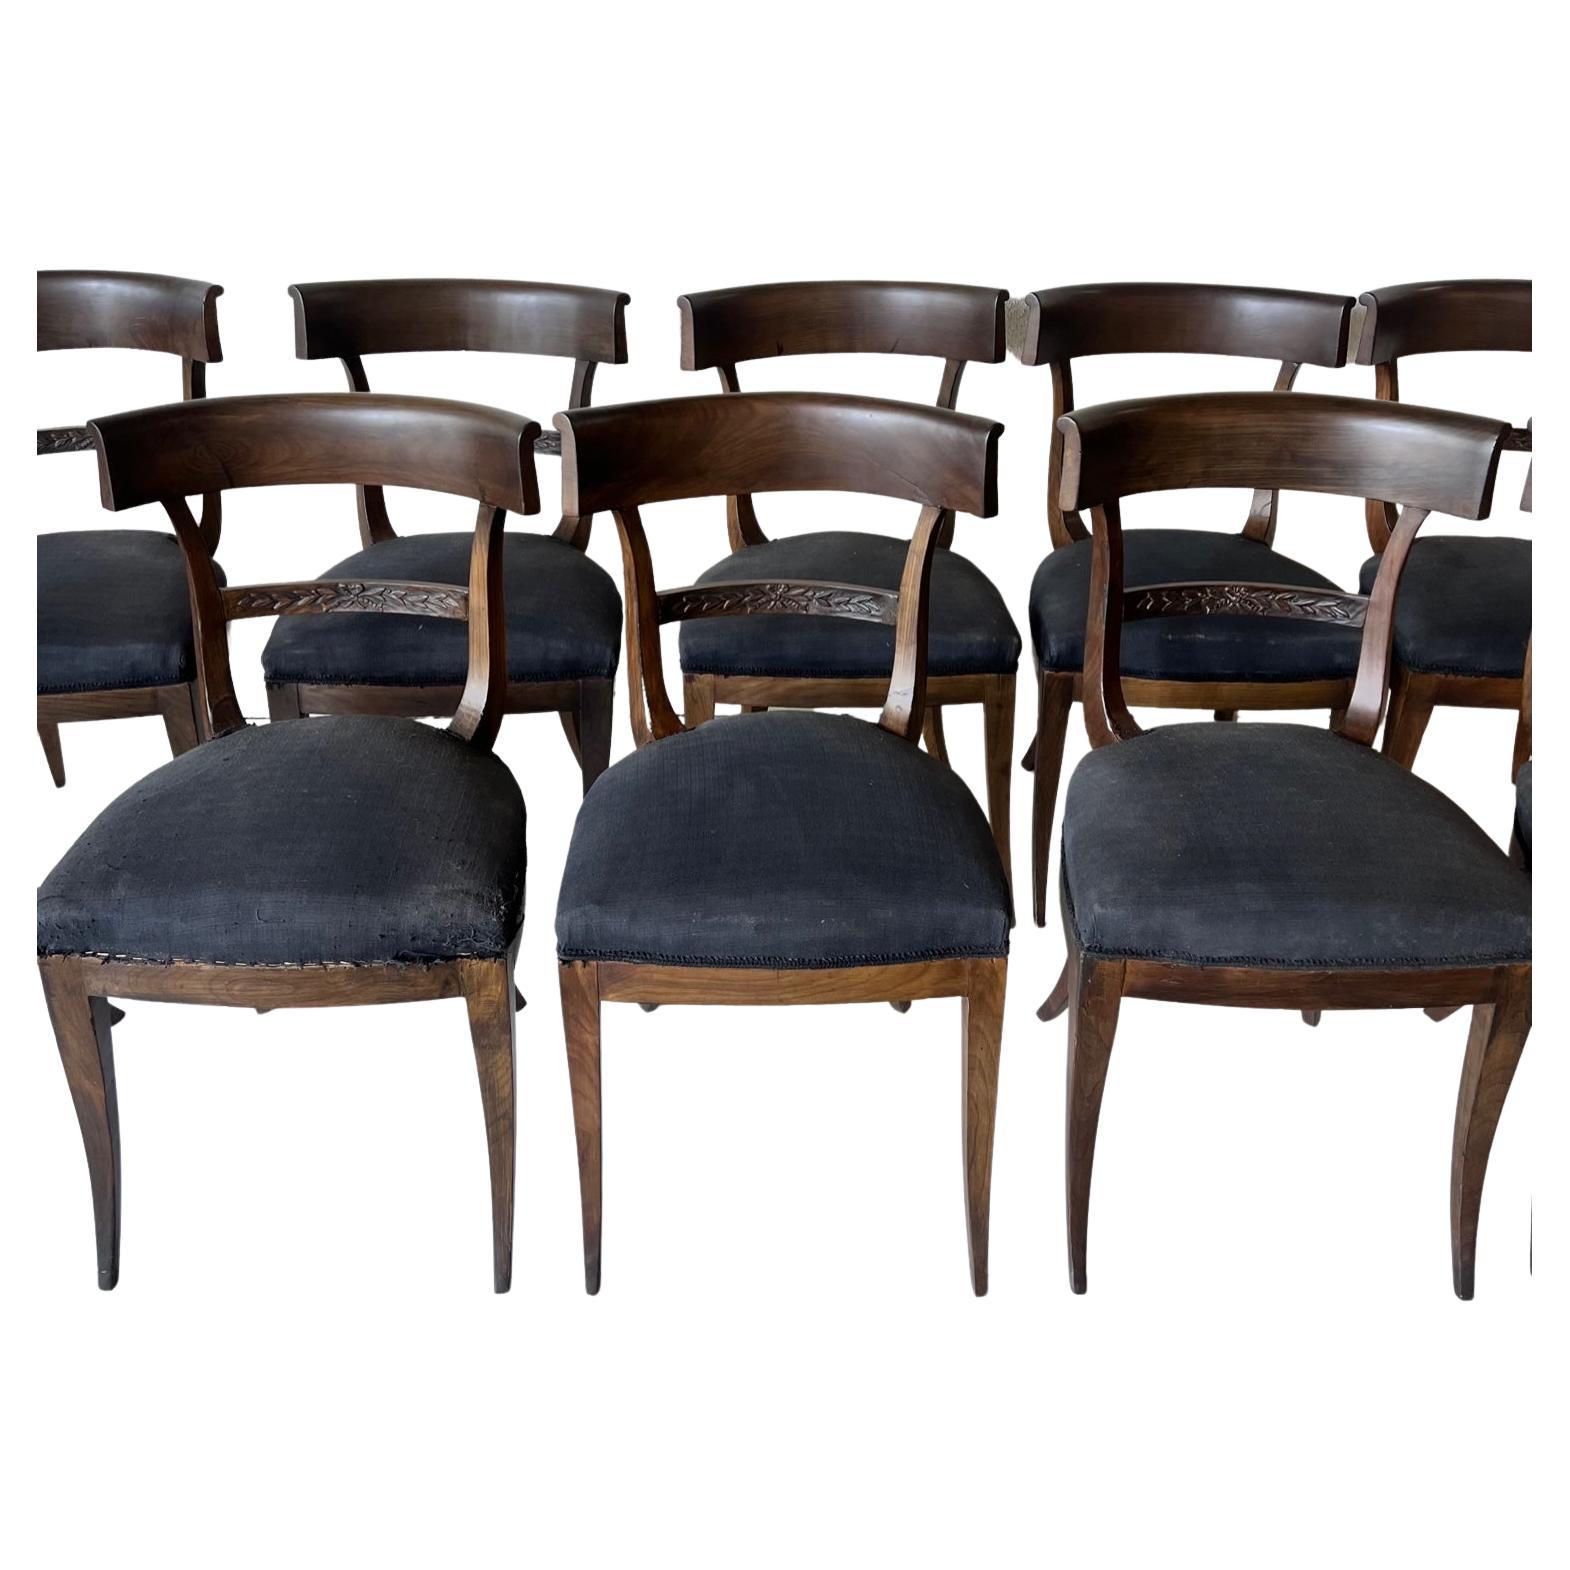 18th C Italian Klismos Chairs set of 10. Concave backrest with curved legs (Klismos). The Klismos style is timeless and classic and never goes out of style. The upholstery on the chairs is very distressed. Purchased In Lucca Italy from 1750's.